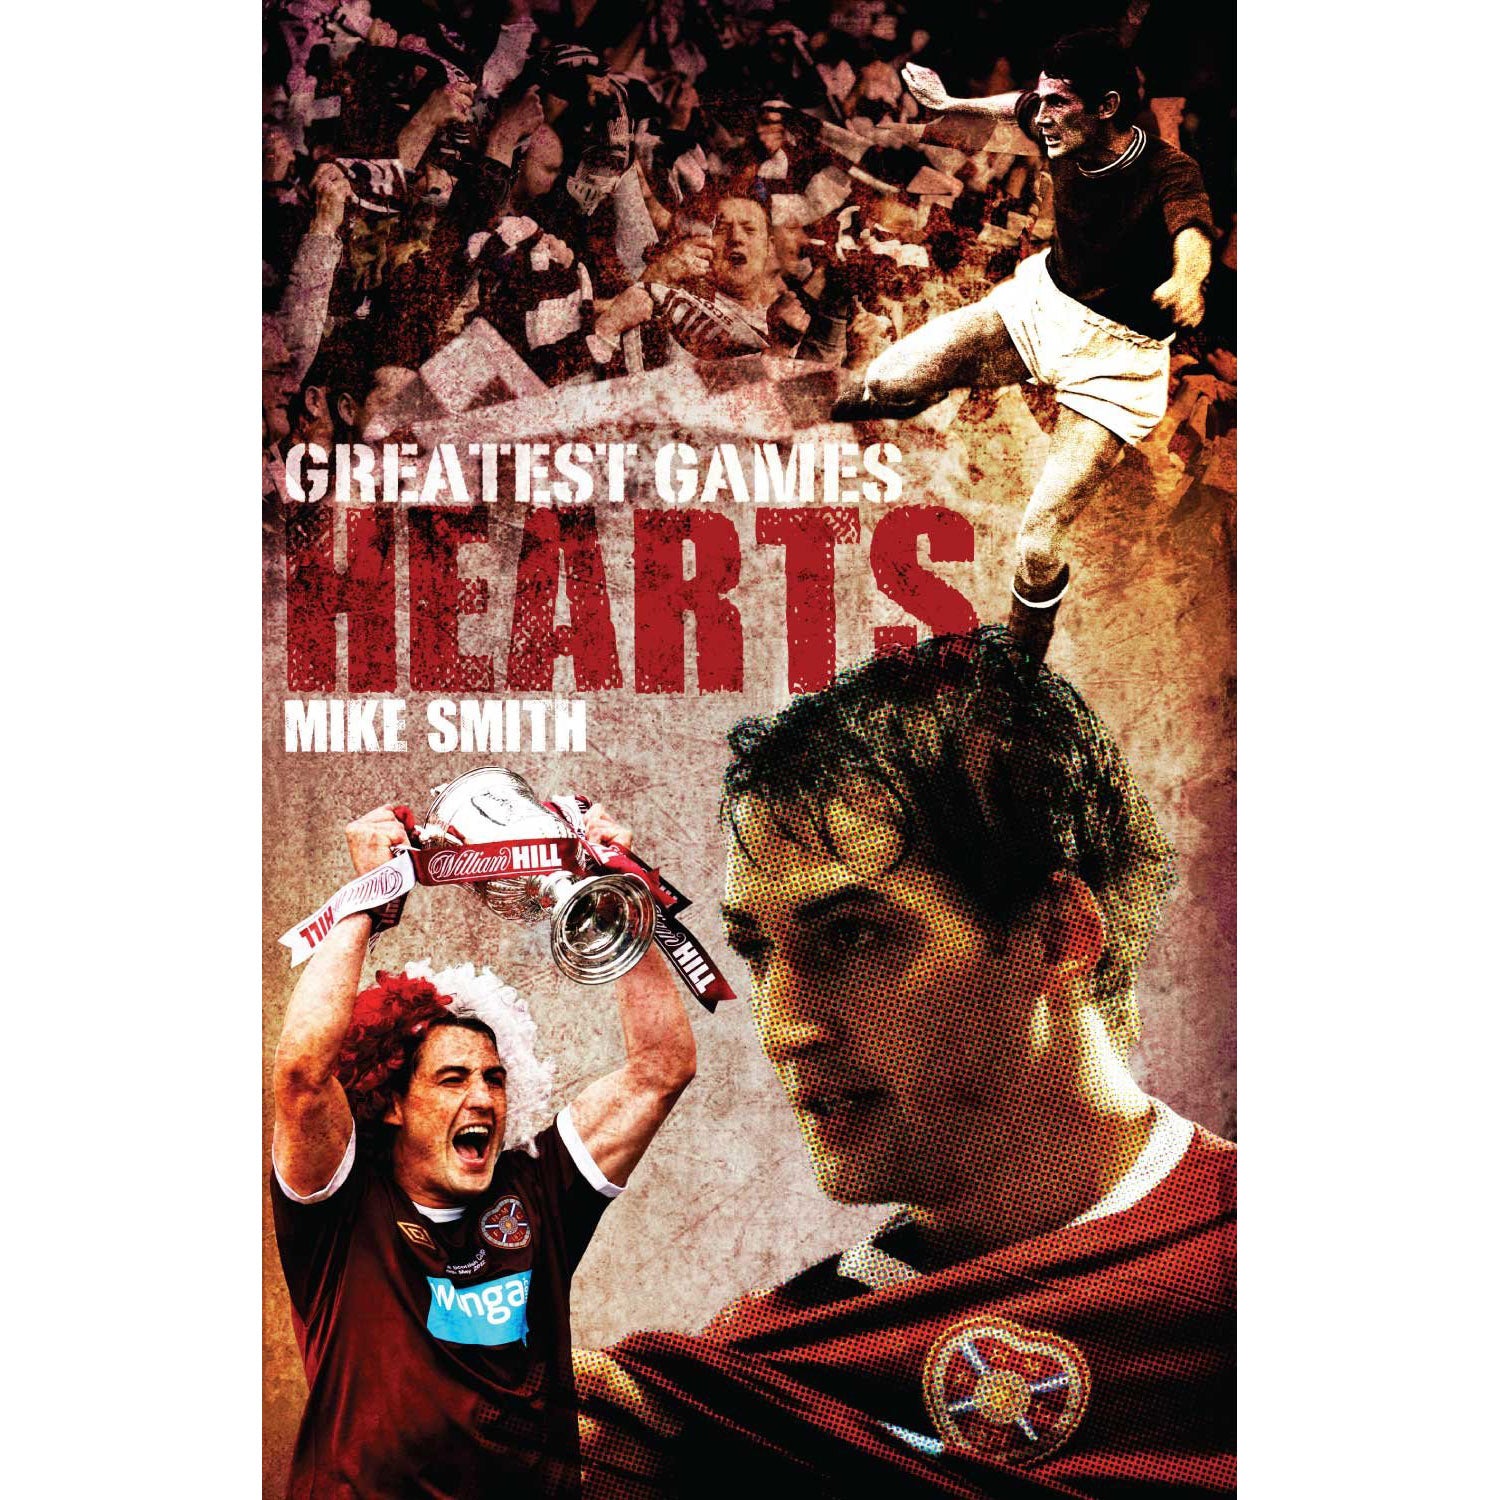 Hearts Greatest Games